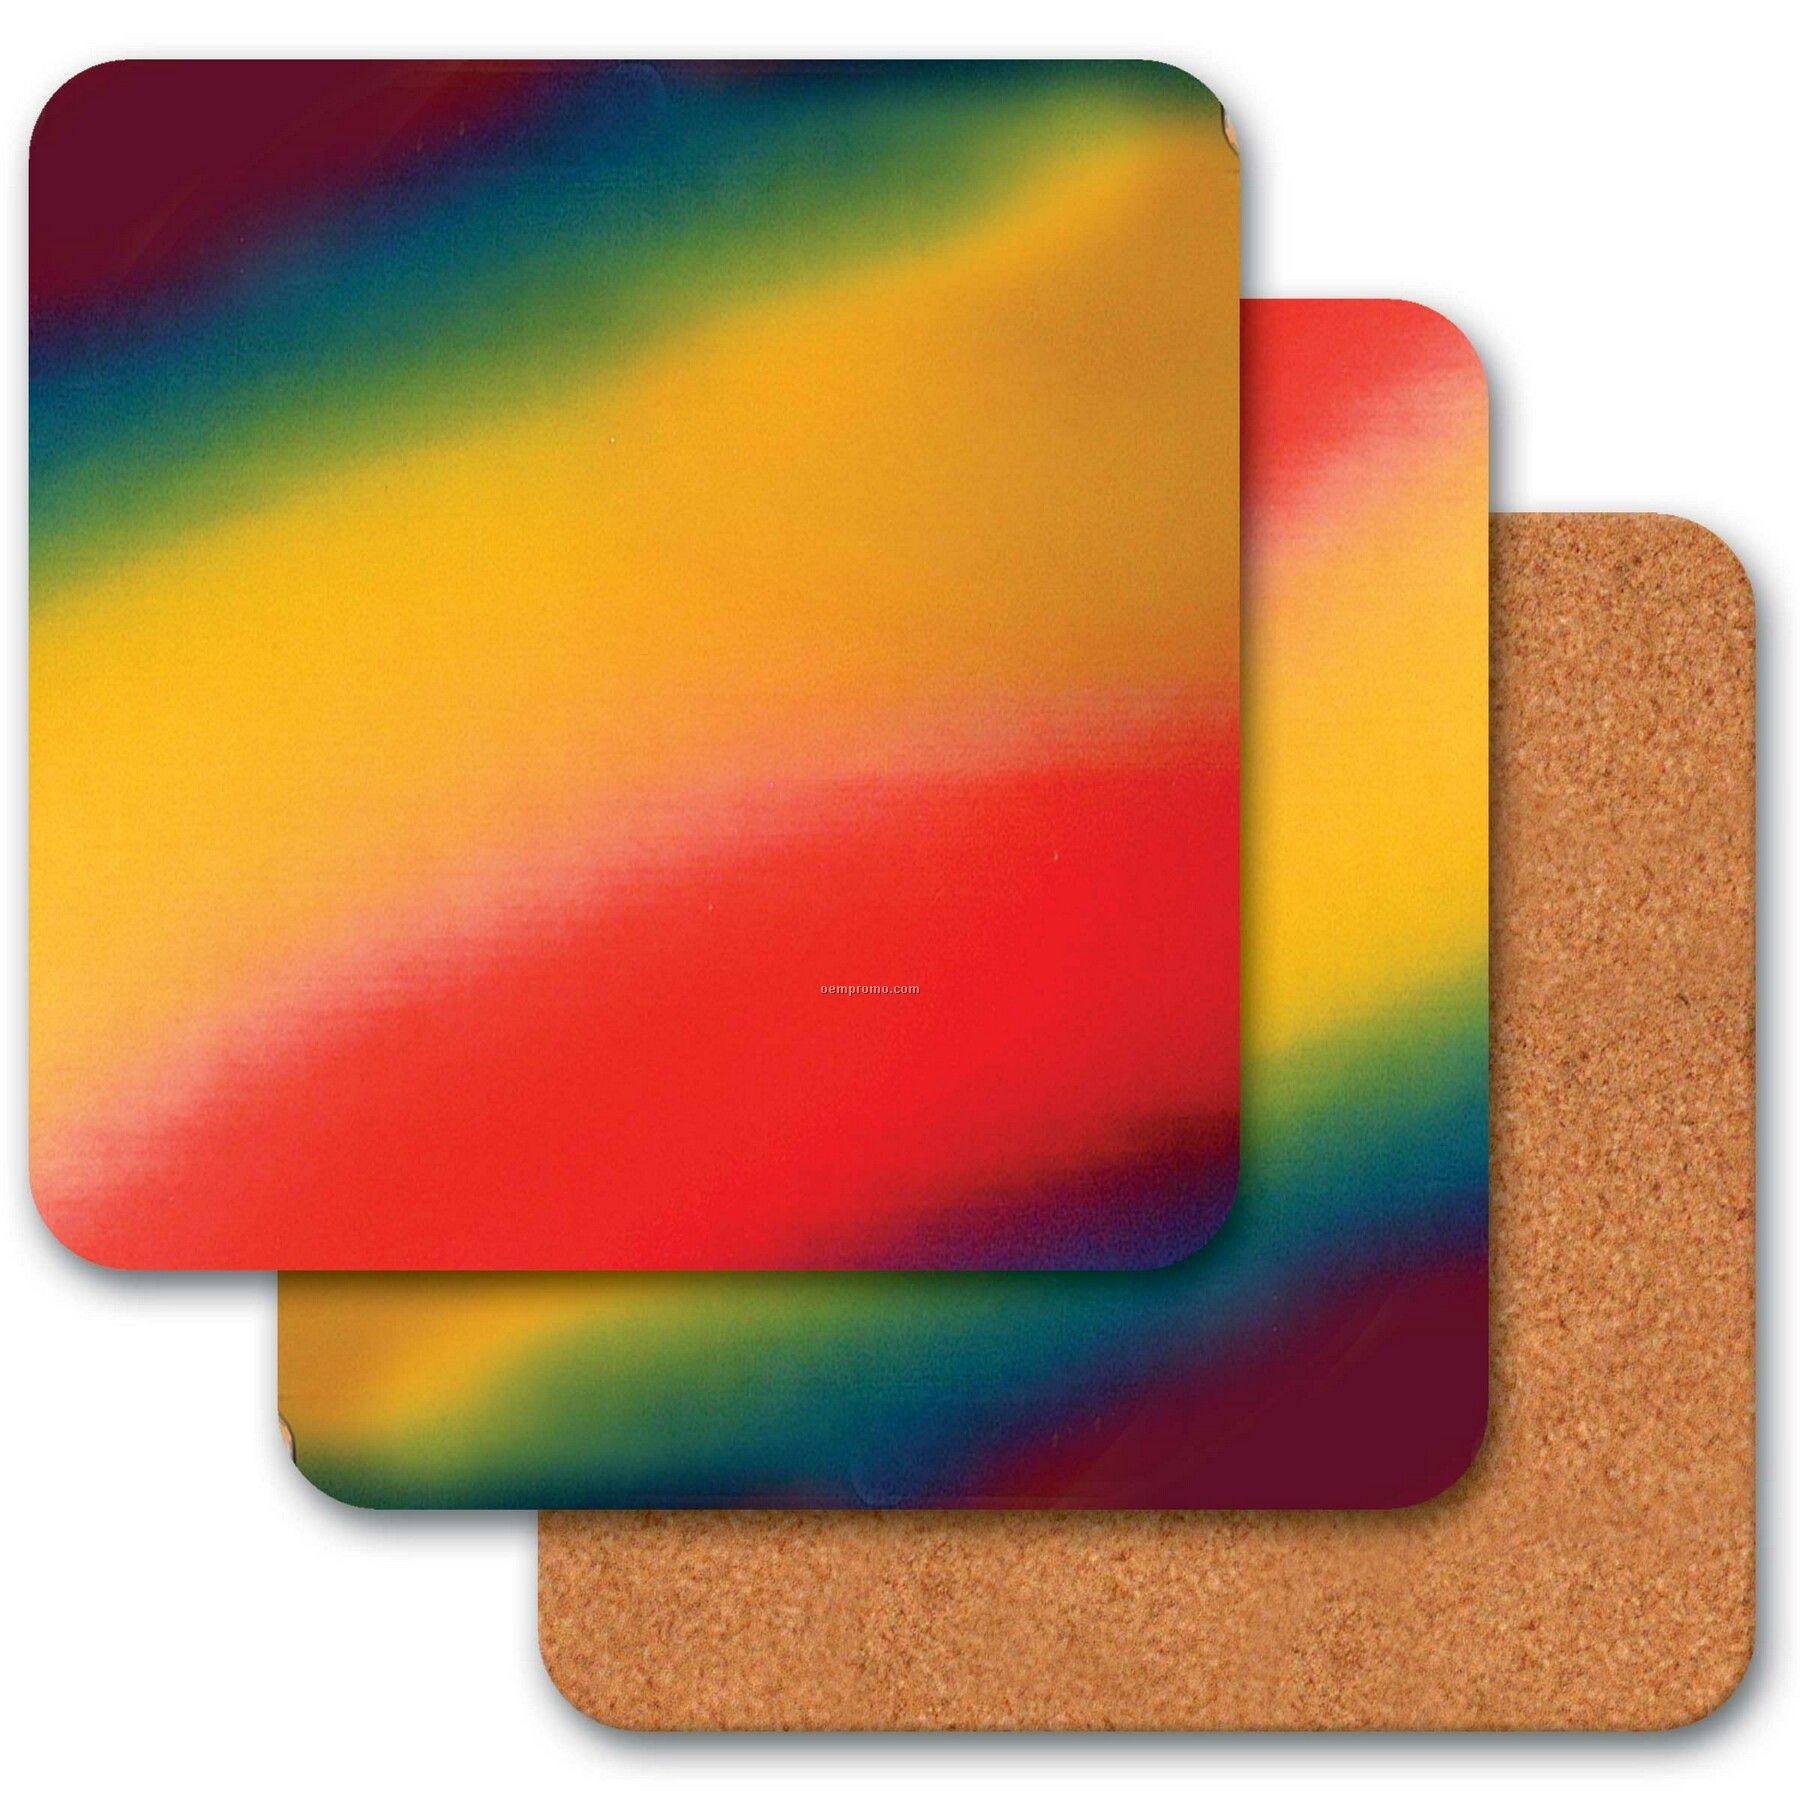 4" Square Coaster W/3d Lenticular Changing Colors Effects (Blanks)